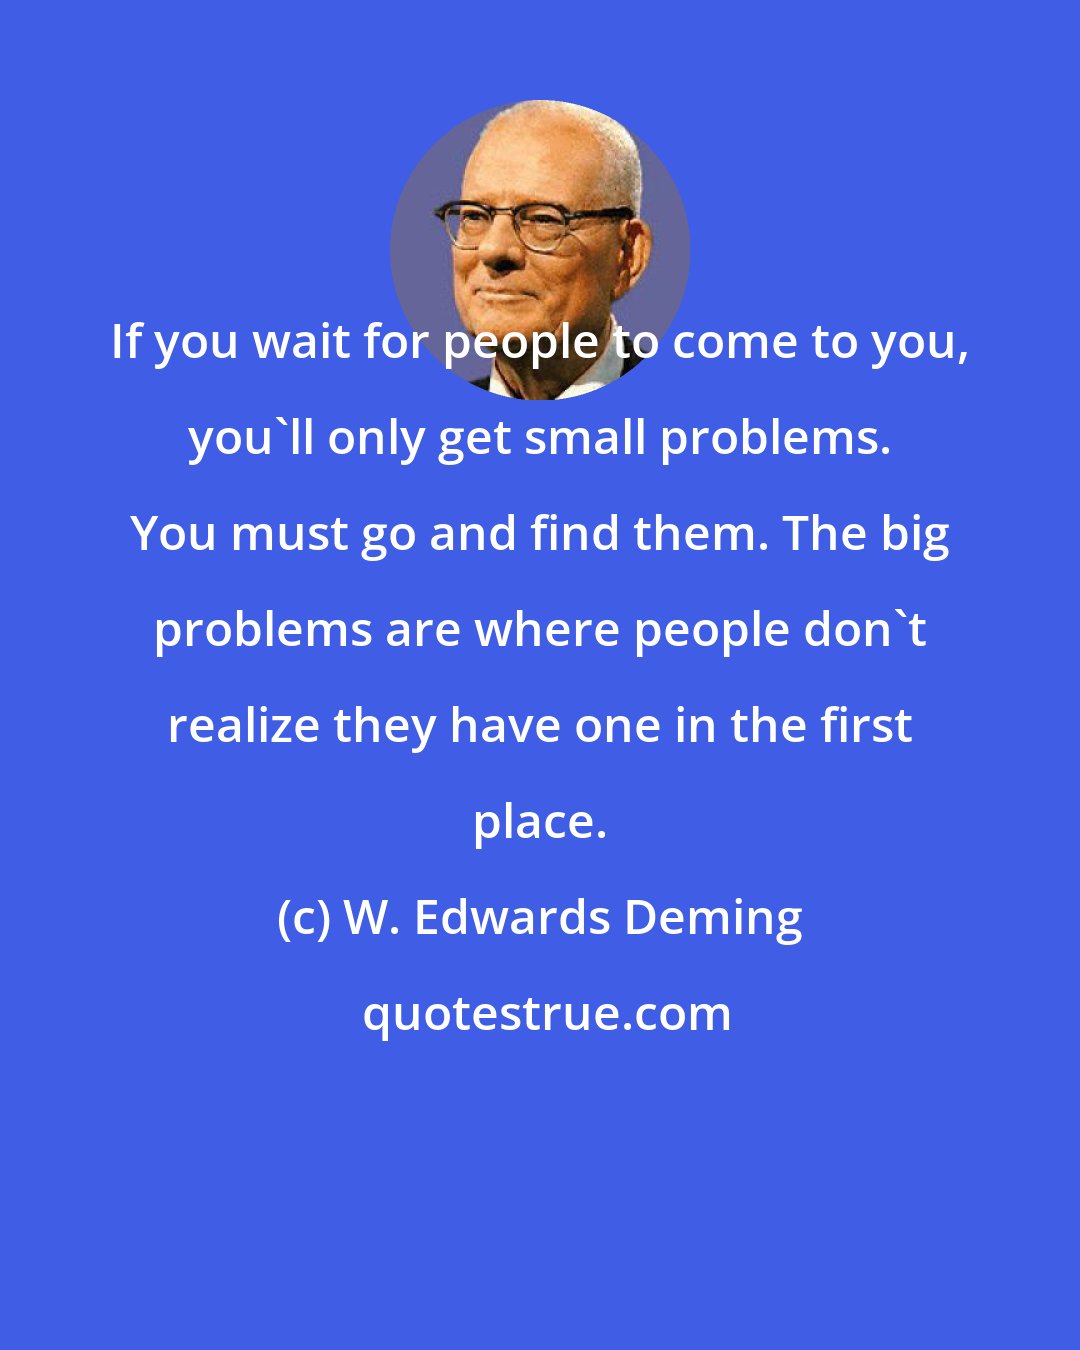 W. Edwards Deming: If you wait for people to come to you, you'll only get small problems. You must go and find them. The big problems are where people don't realize they have one in the first place.